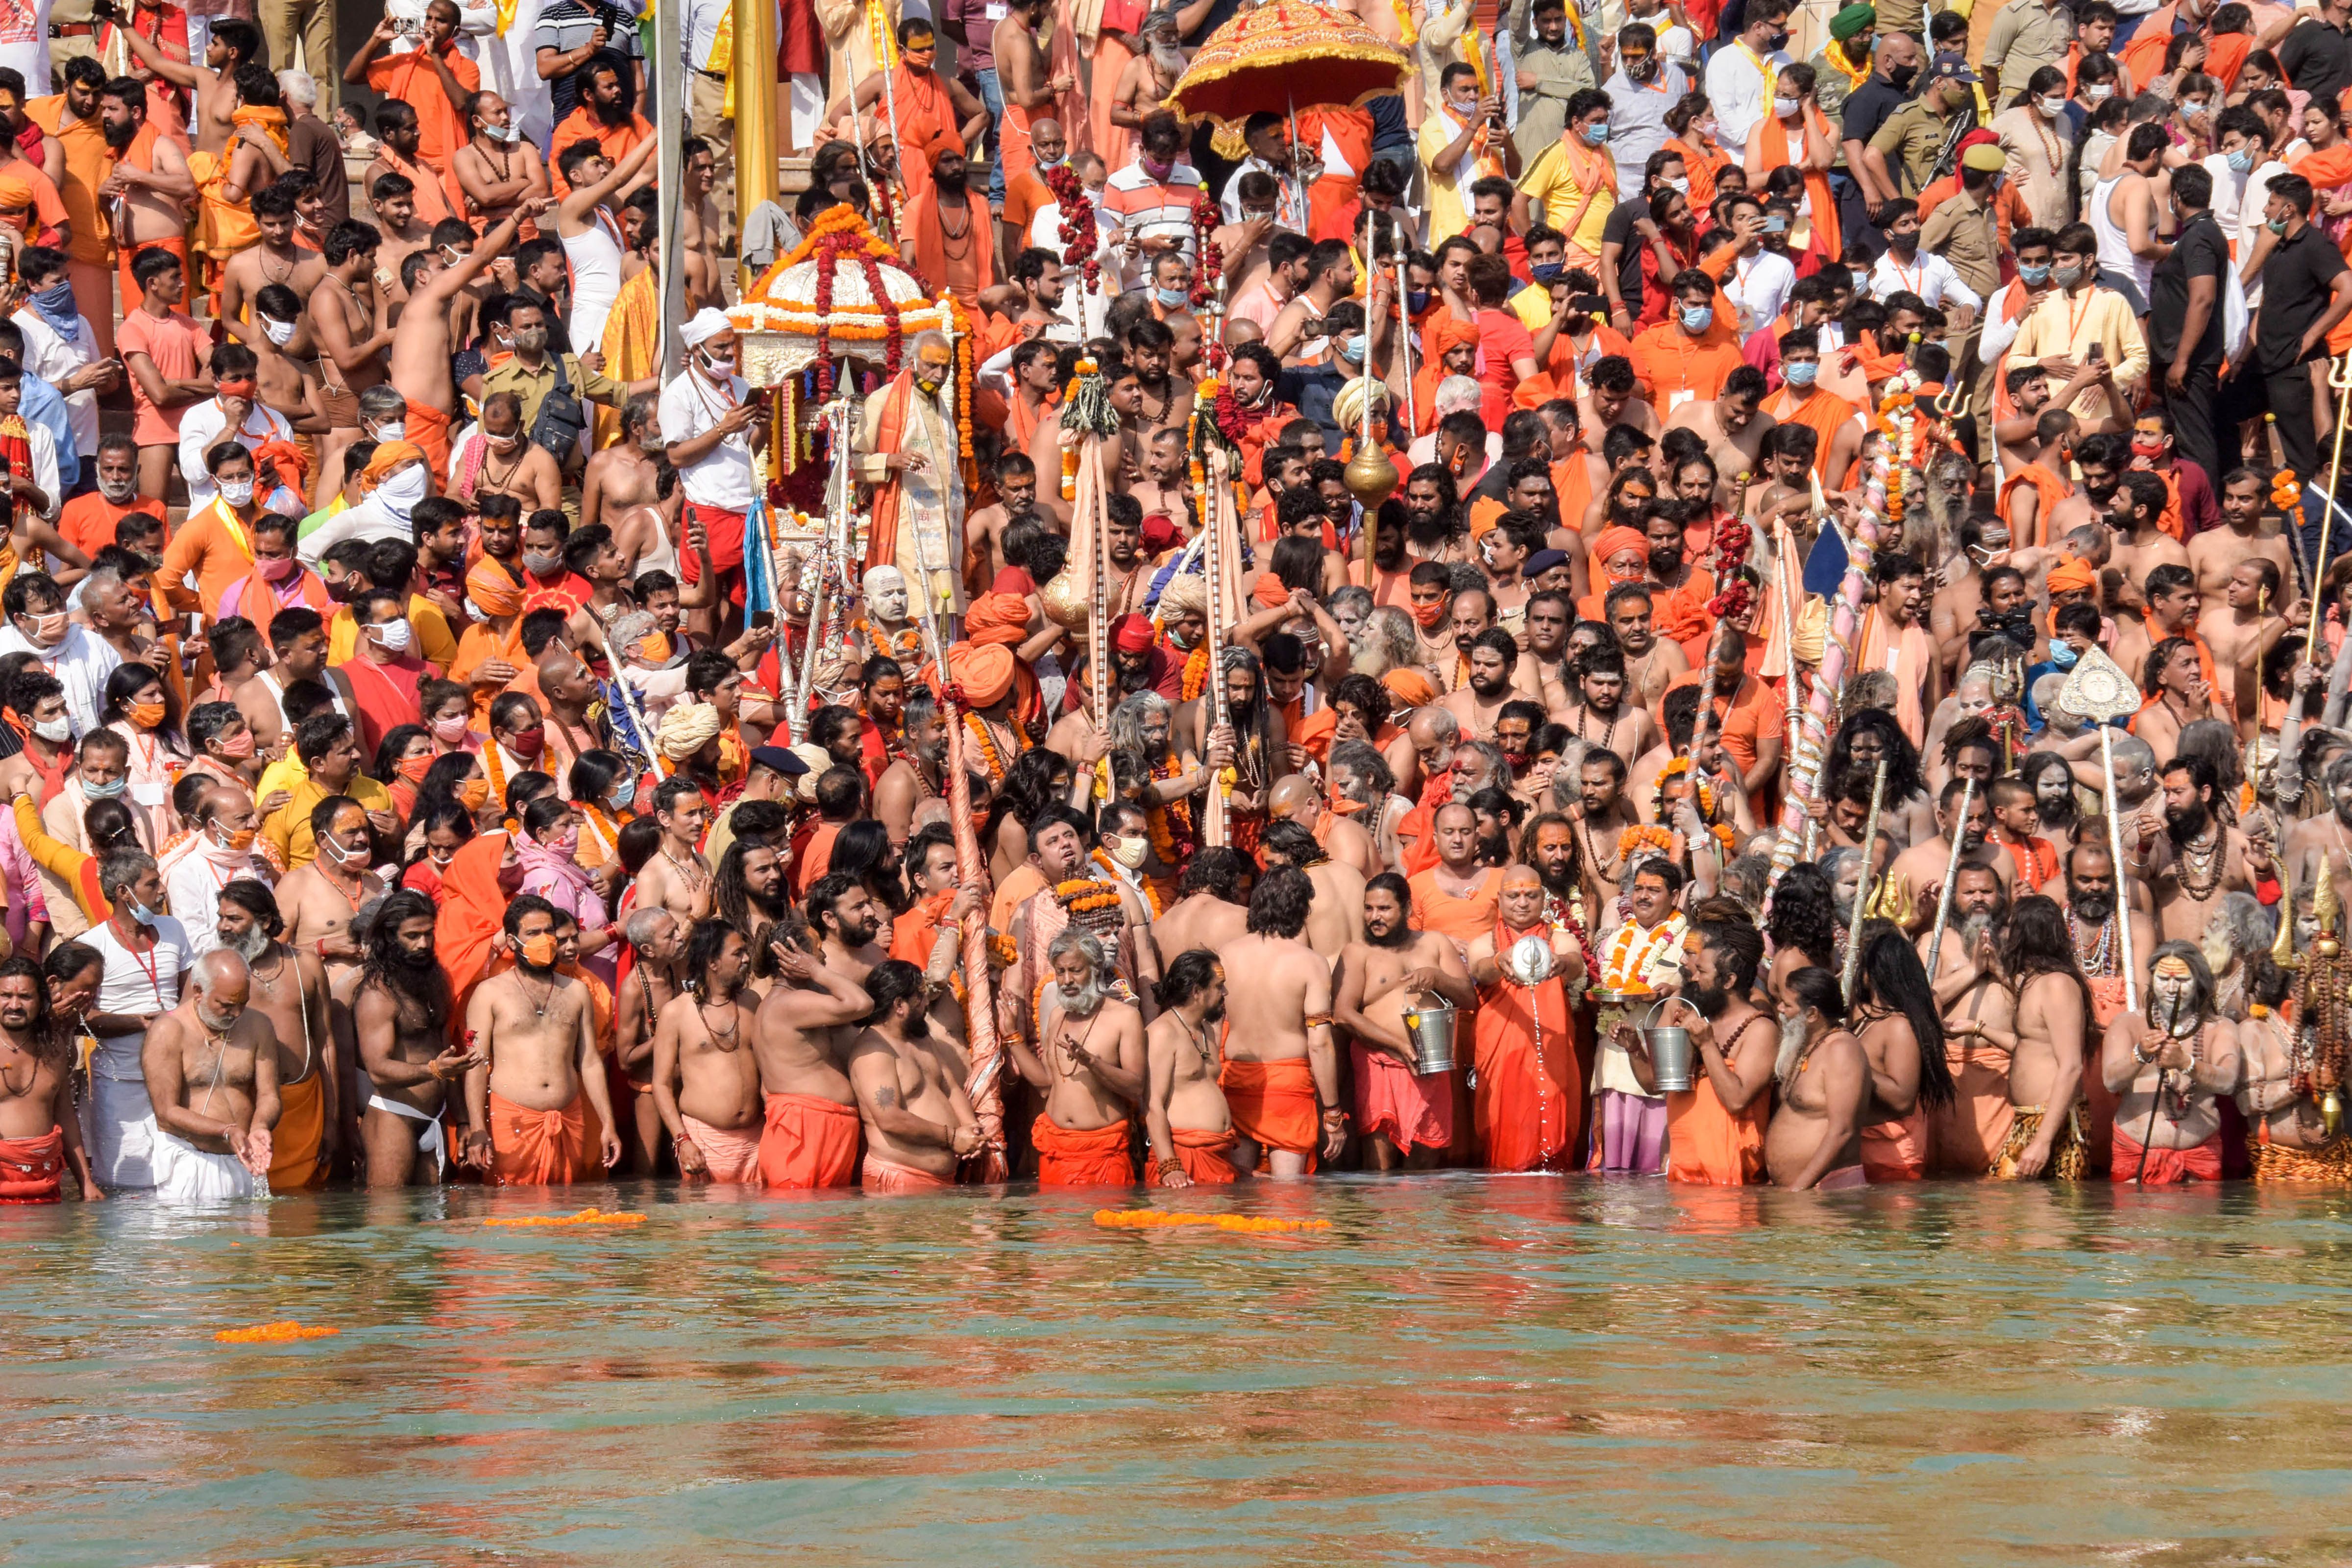 The Kumbh Mela returnees have been advised to resume normal activities only after their Covid test report result is negative.